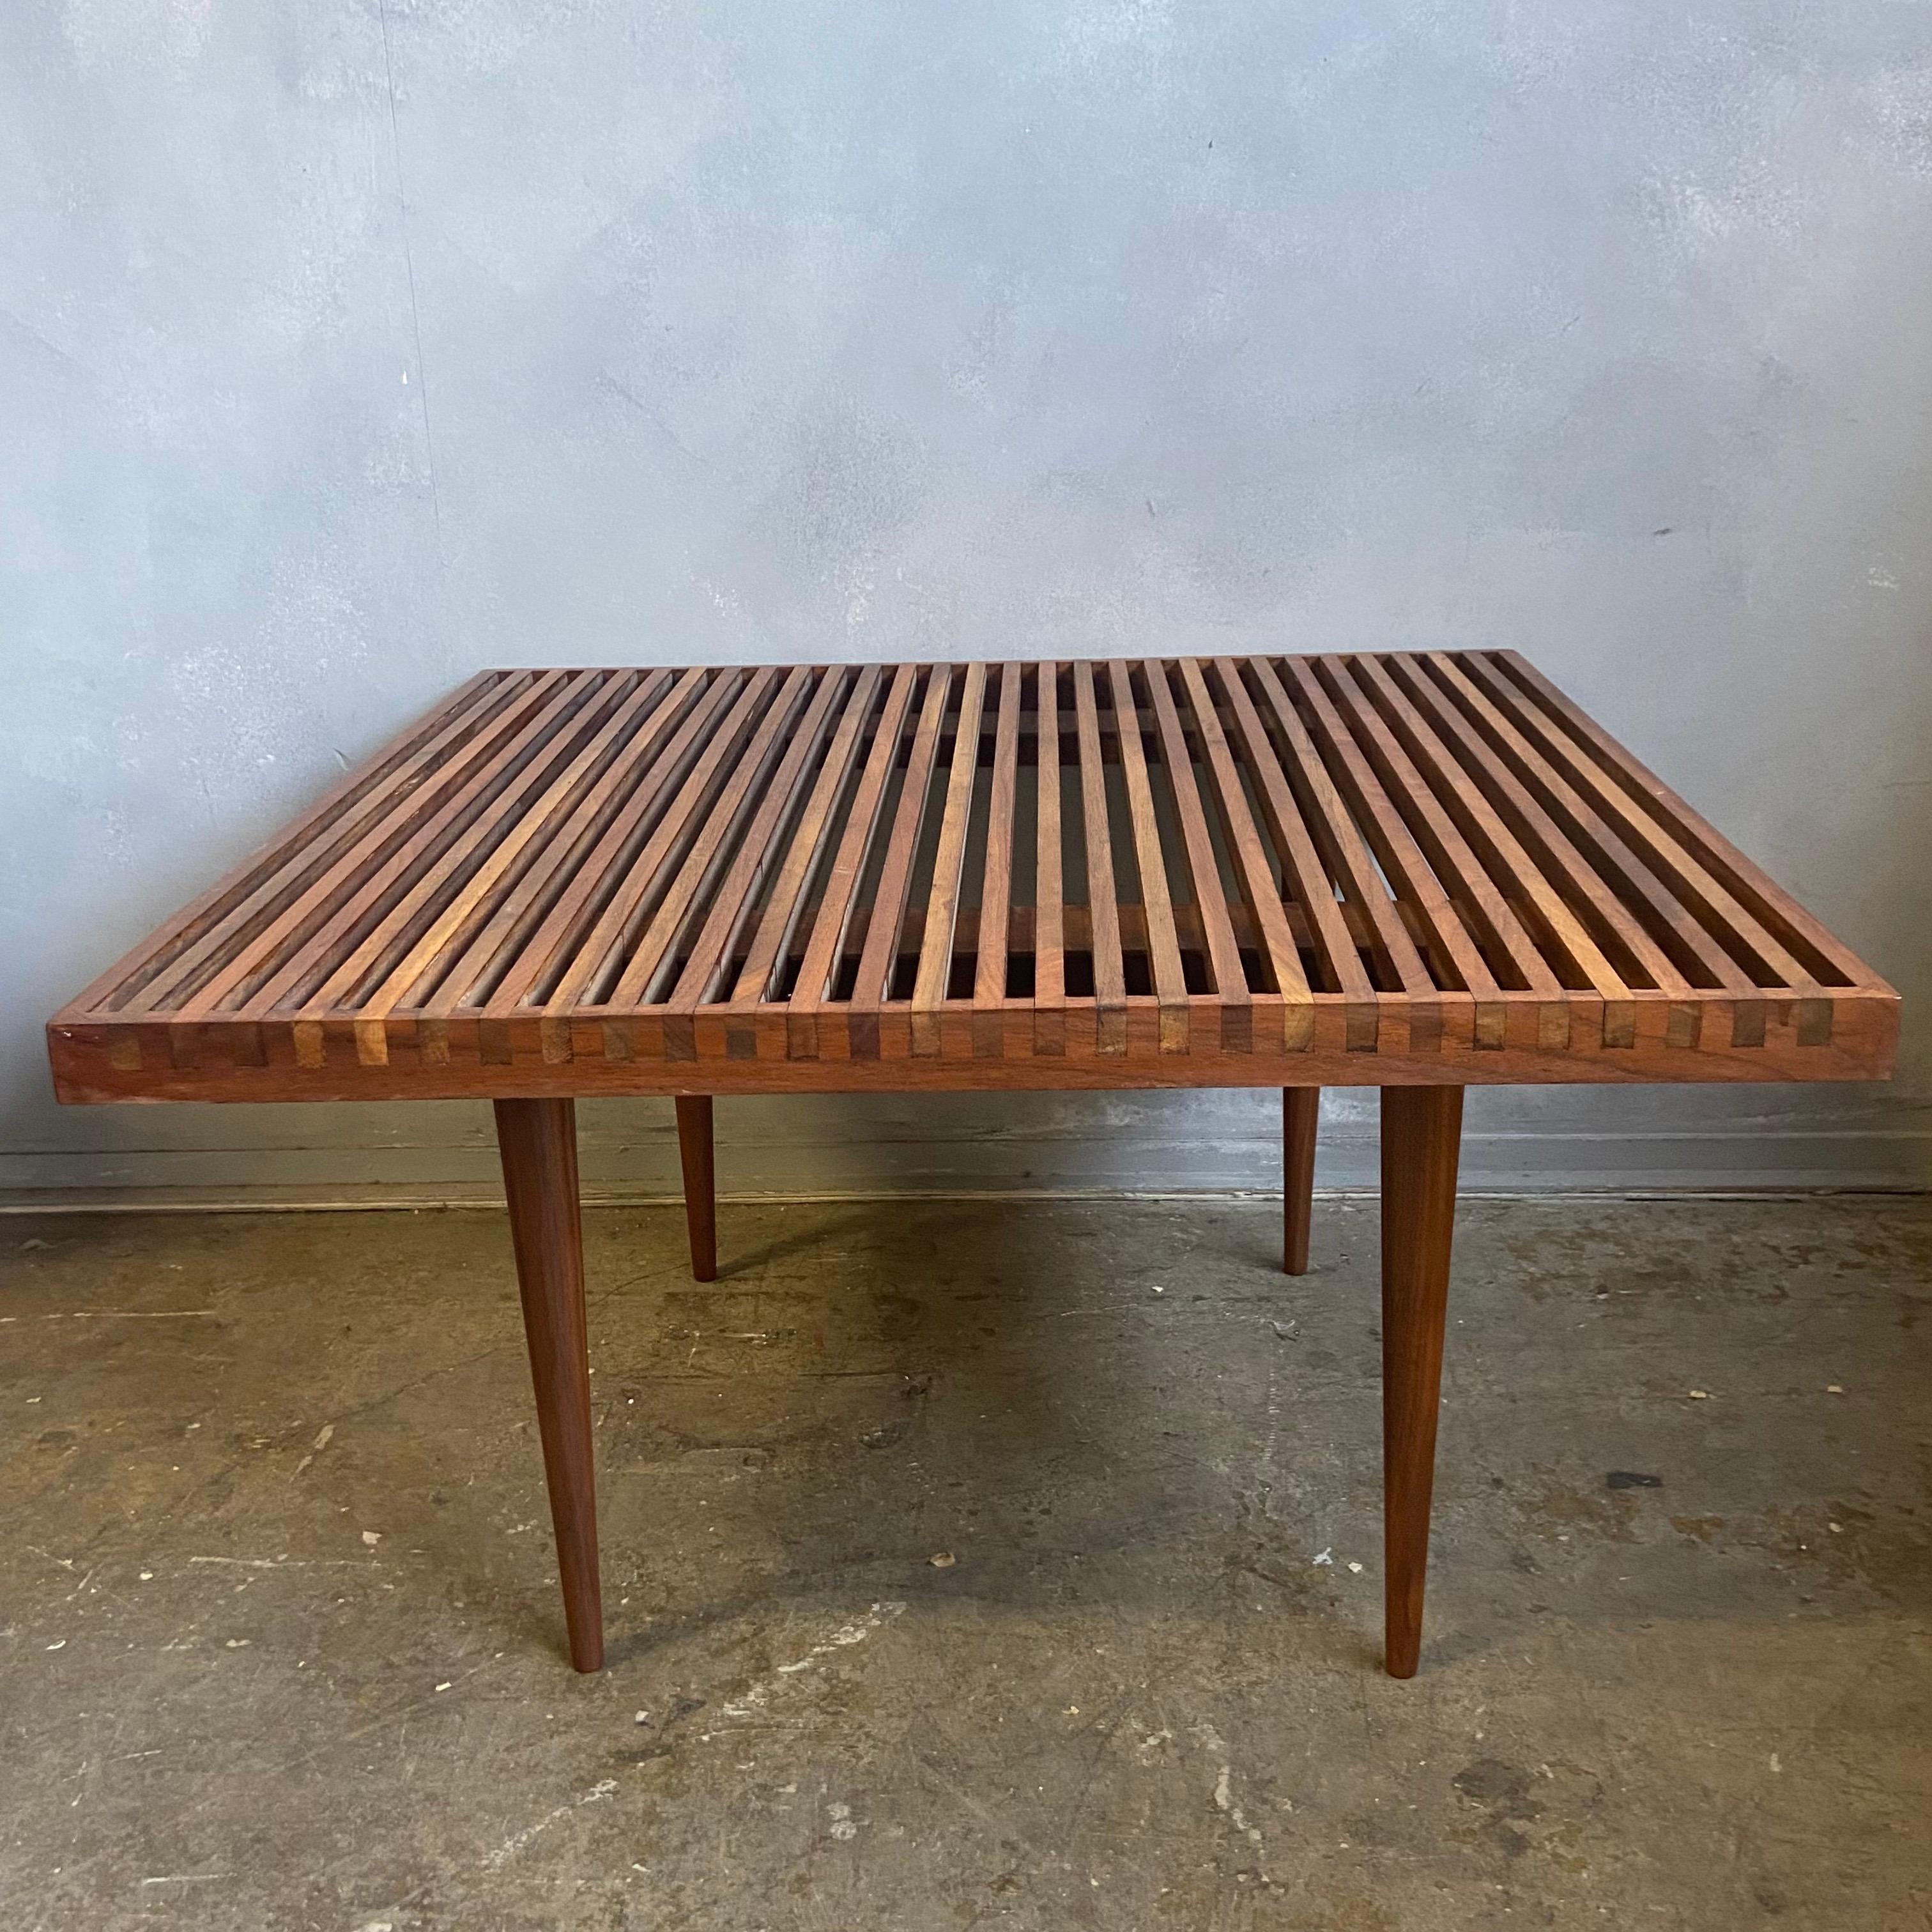 For your consideration is this beautiful walnut slat wood coffee table designed by Mel Smilow. Featuring wonderful dovetailed joinery on a square frame resting on tapered legs. A classic design that can function as a side table or coffee table.